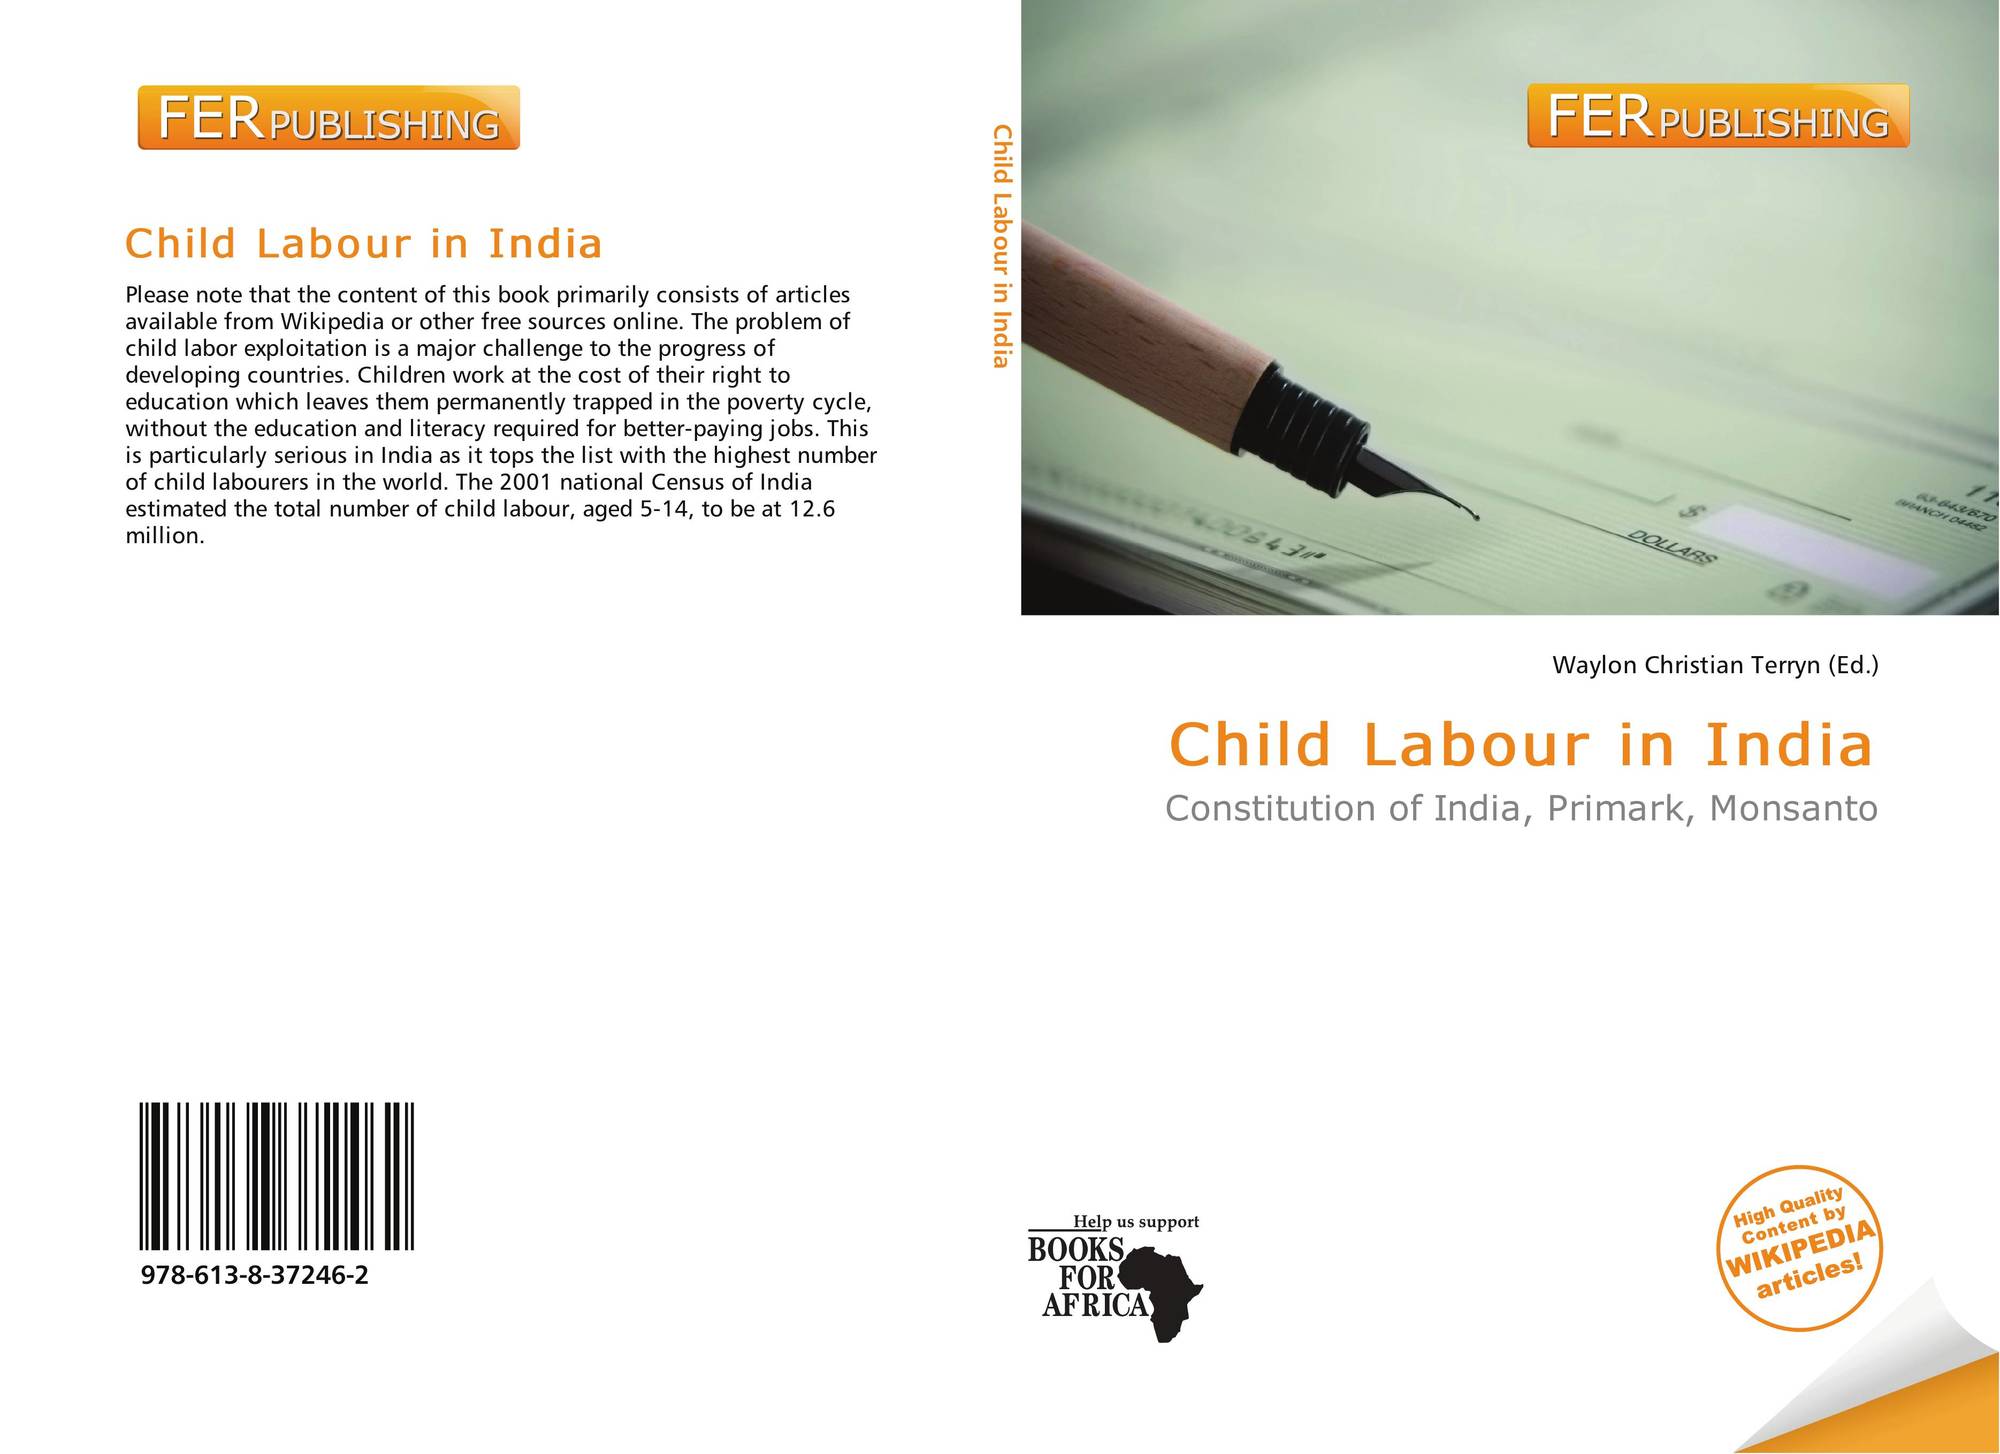 phd thesis on child labour in india